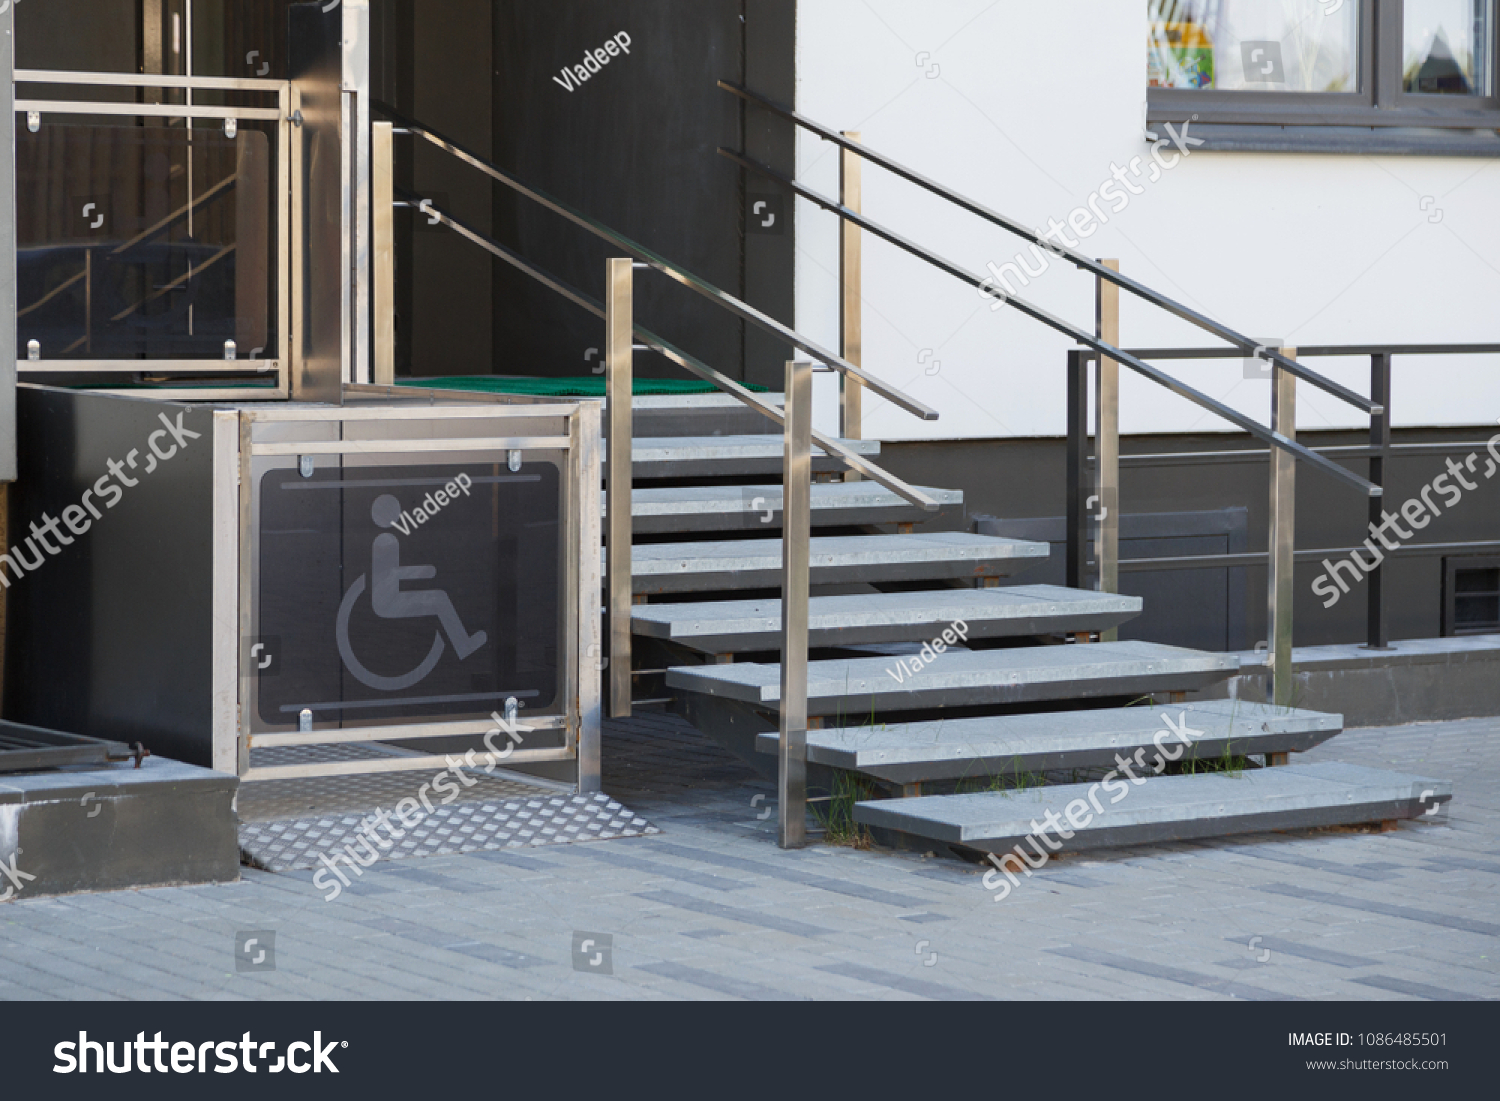 Living house entrance equipped with special lifting platform for wheelchair users #1086485501